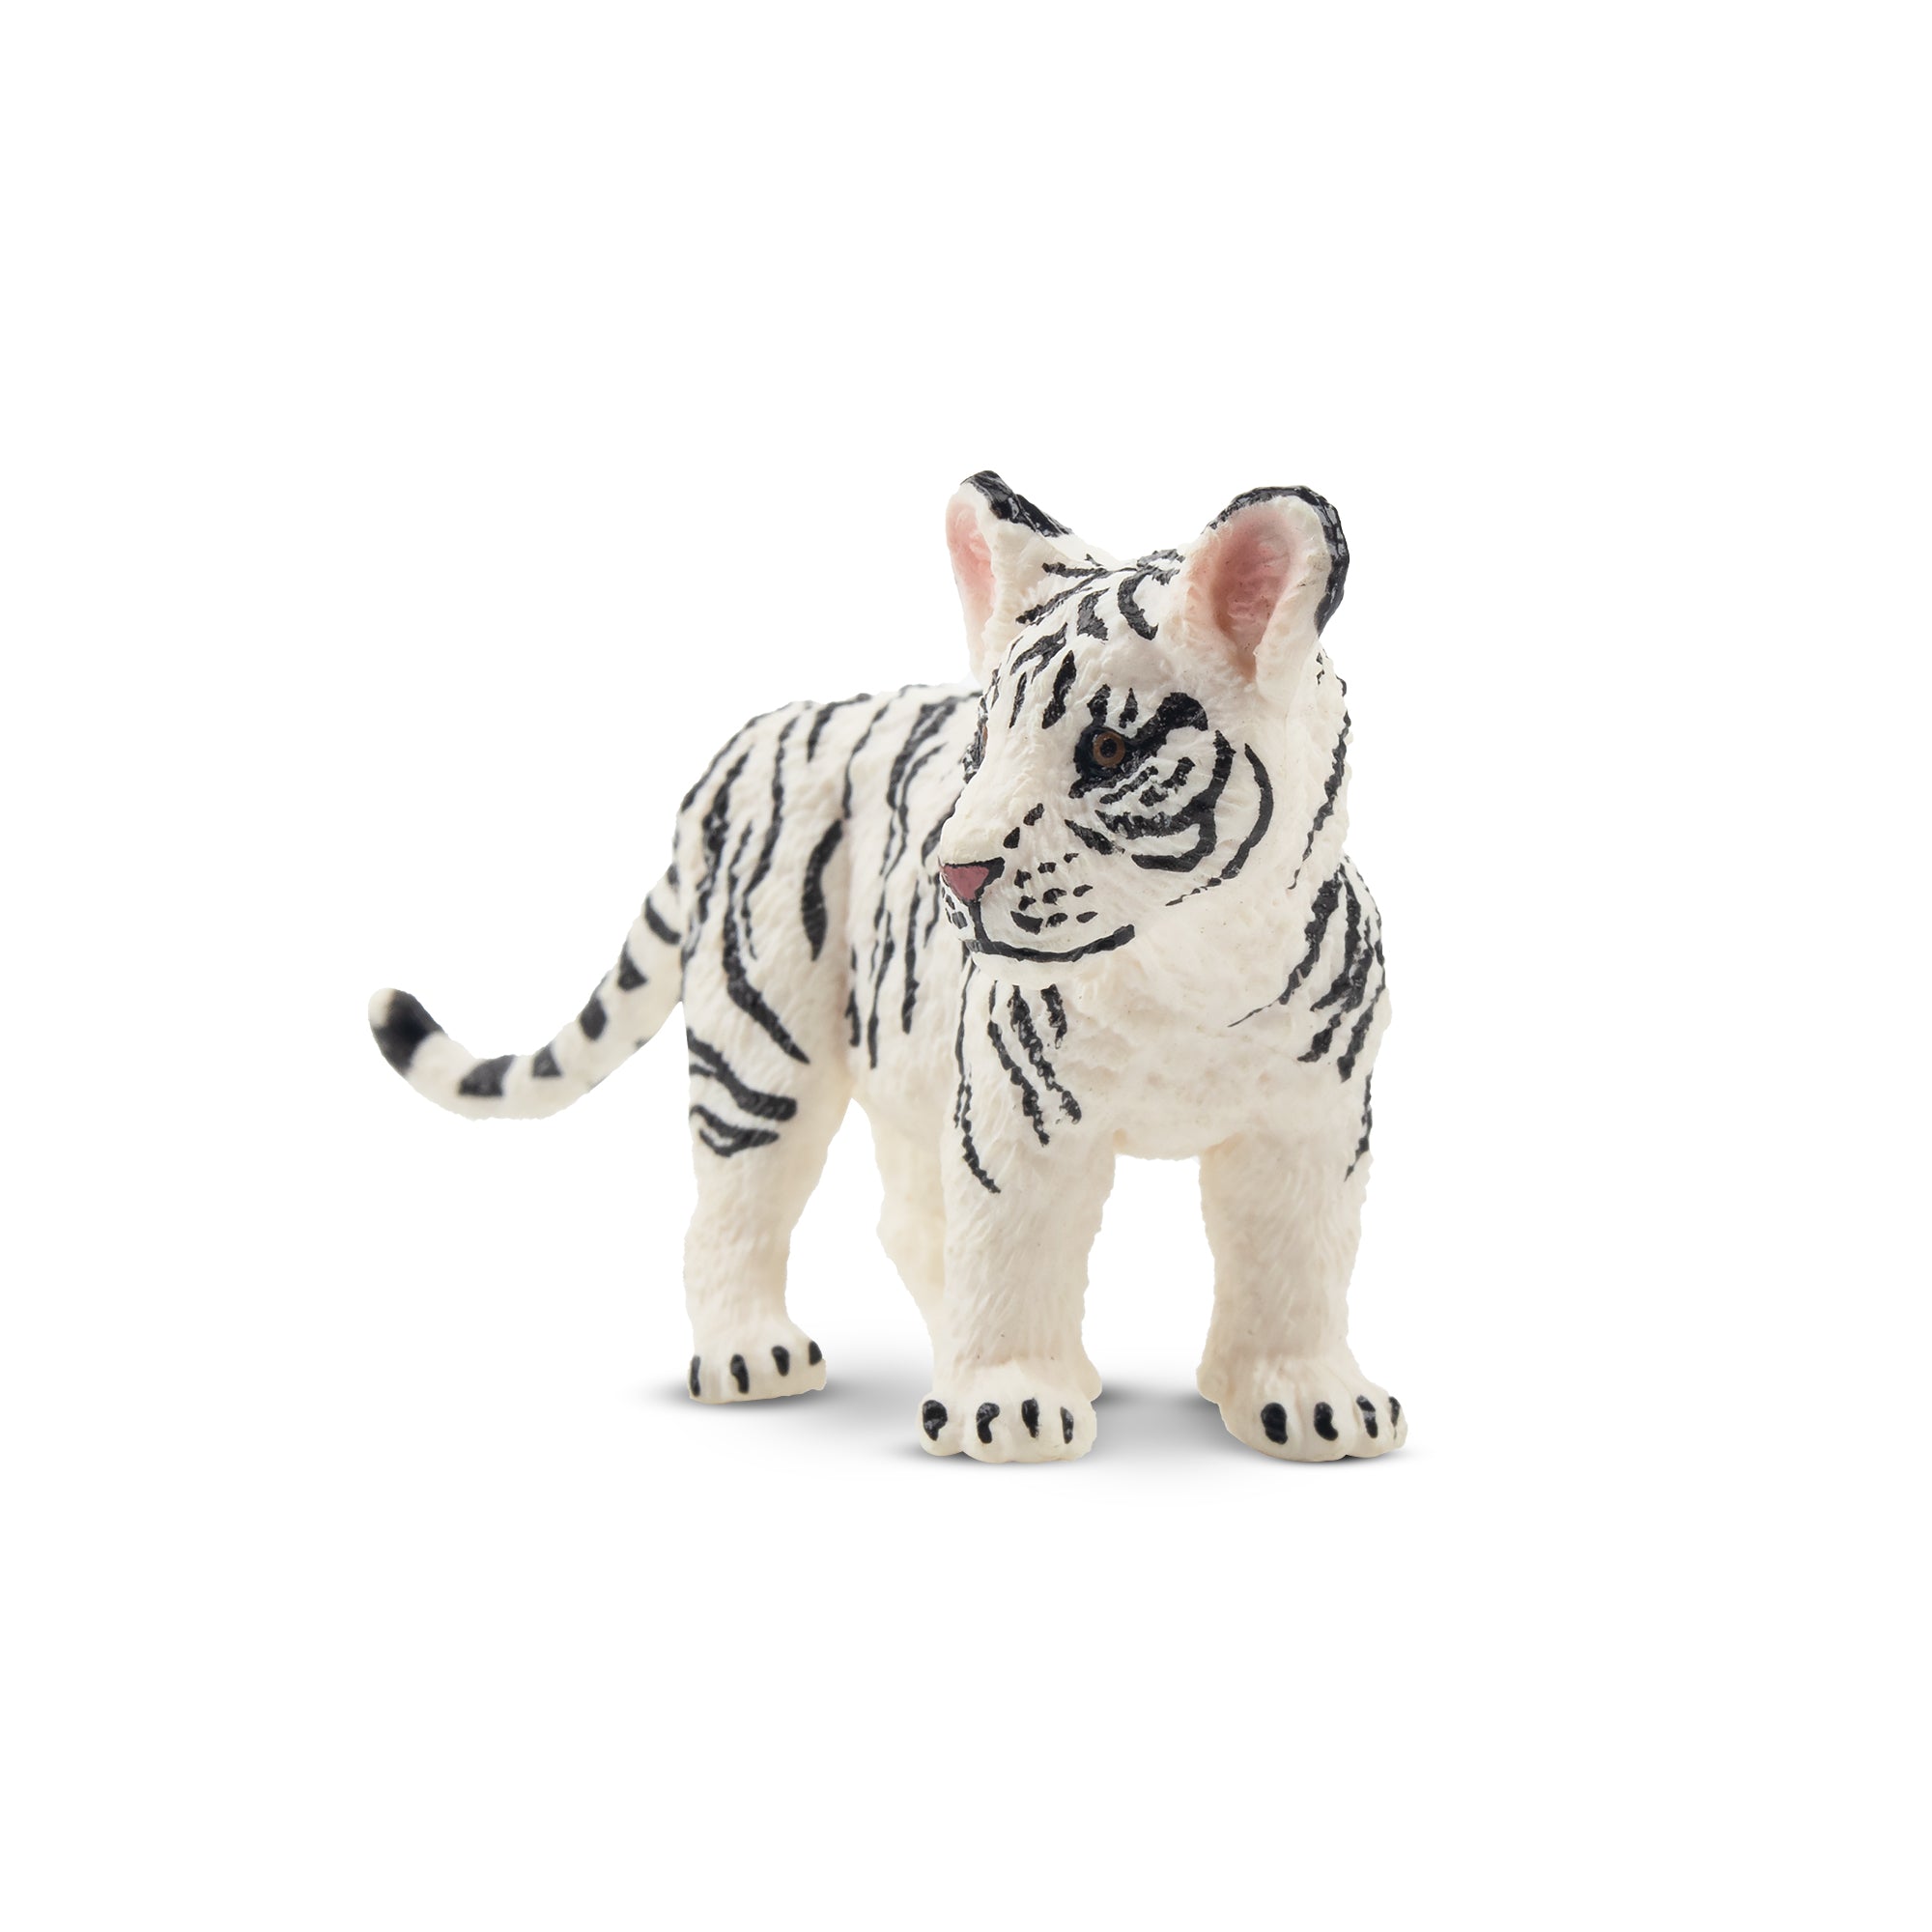 Toymany Standing White Tiger Cub Figurine Toy - 2-front